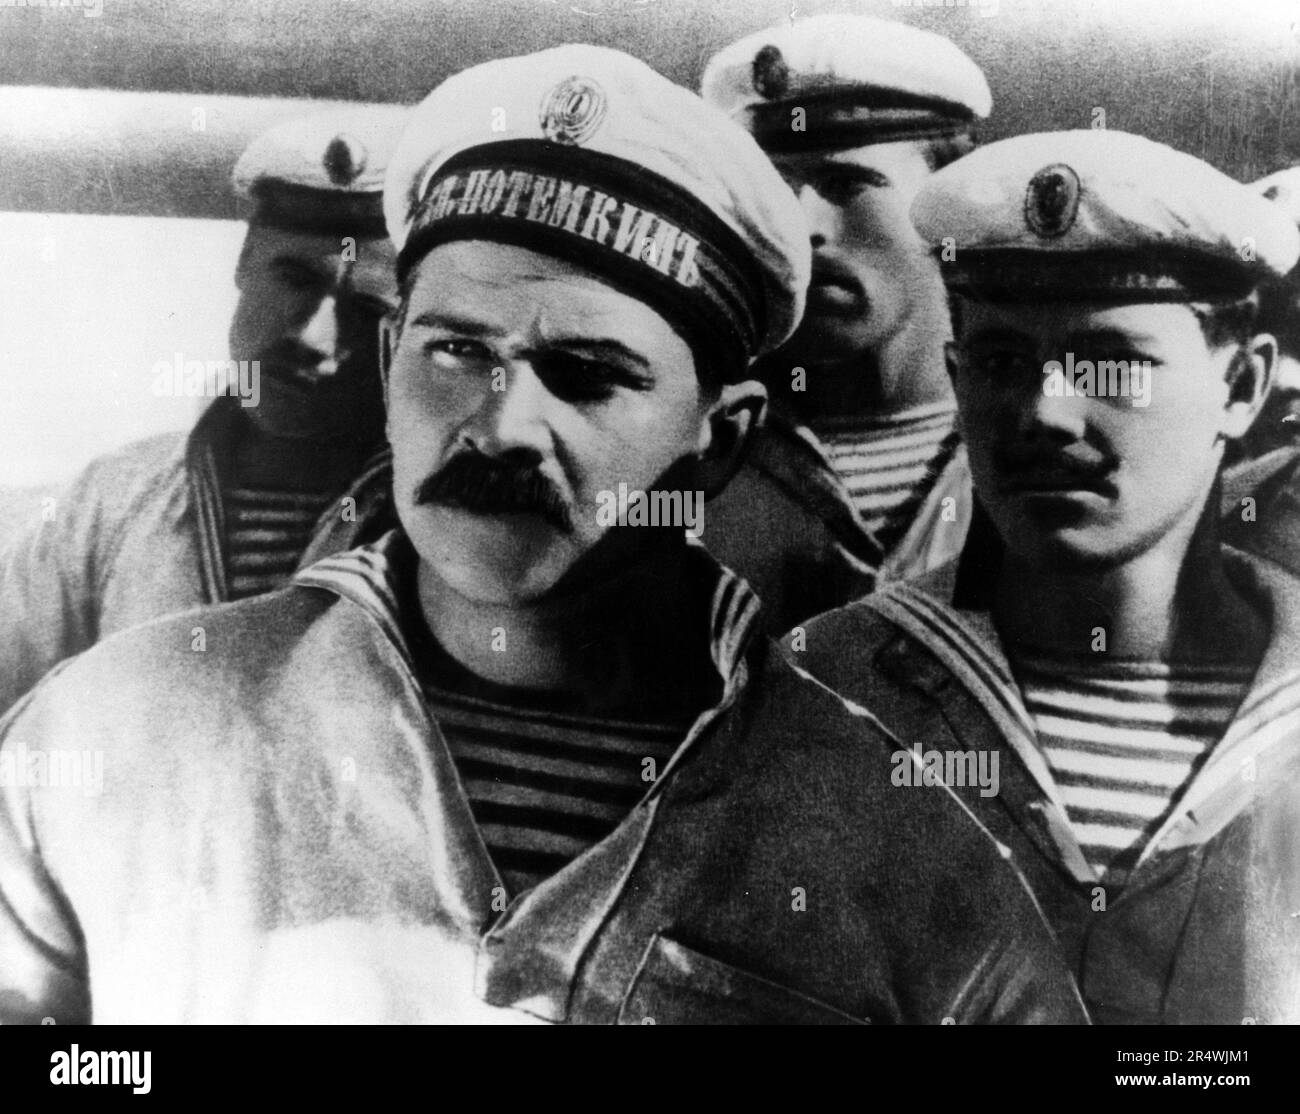 Battleship Potemkin, sometimes rendered as Battleship Potyomkin, is a 1925 silent film directed by Sergei Eisenstein and produced by Mosfilm. It presents a dramatized version of the mutiny that occurred in 1905 when the crew of the Russian battleship Potemkin rebelled against their officers of the Tsarist regime. Battleship Potemkin has been called one of the most influential propaganda films of all time, and was named the greatest film of all time at the Brussels World's Fair in 1958. Stock Photo